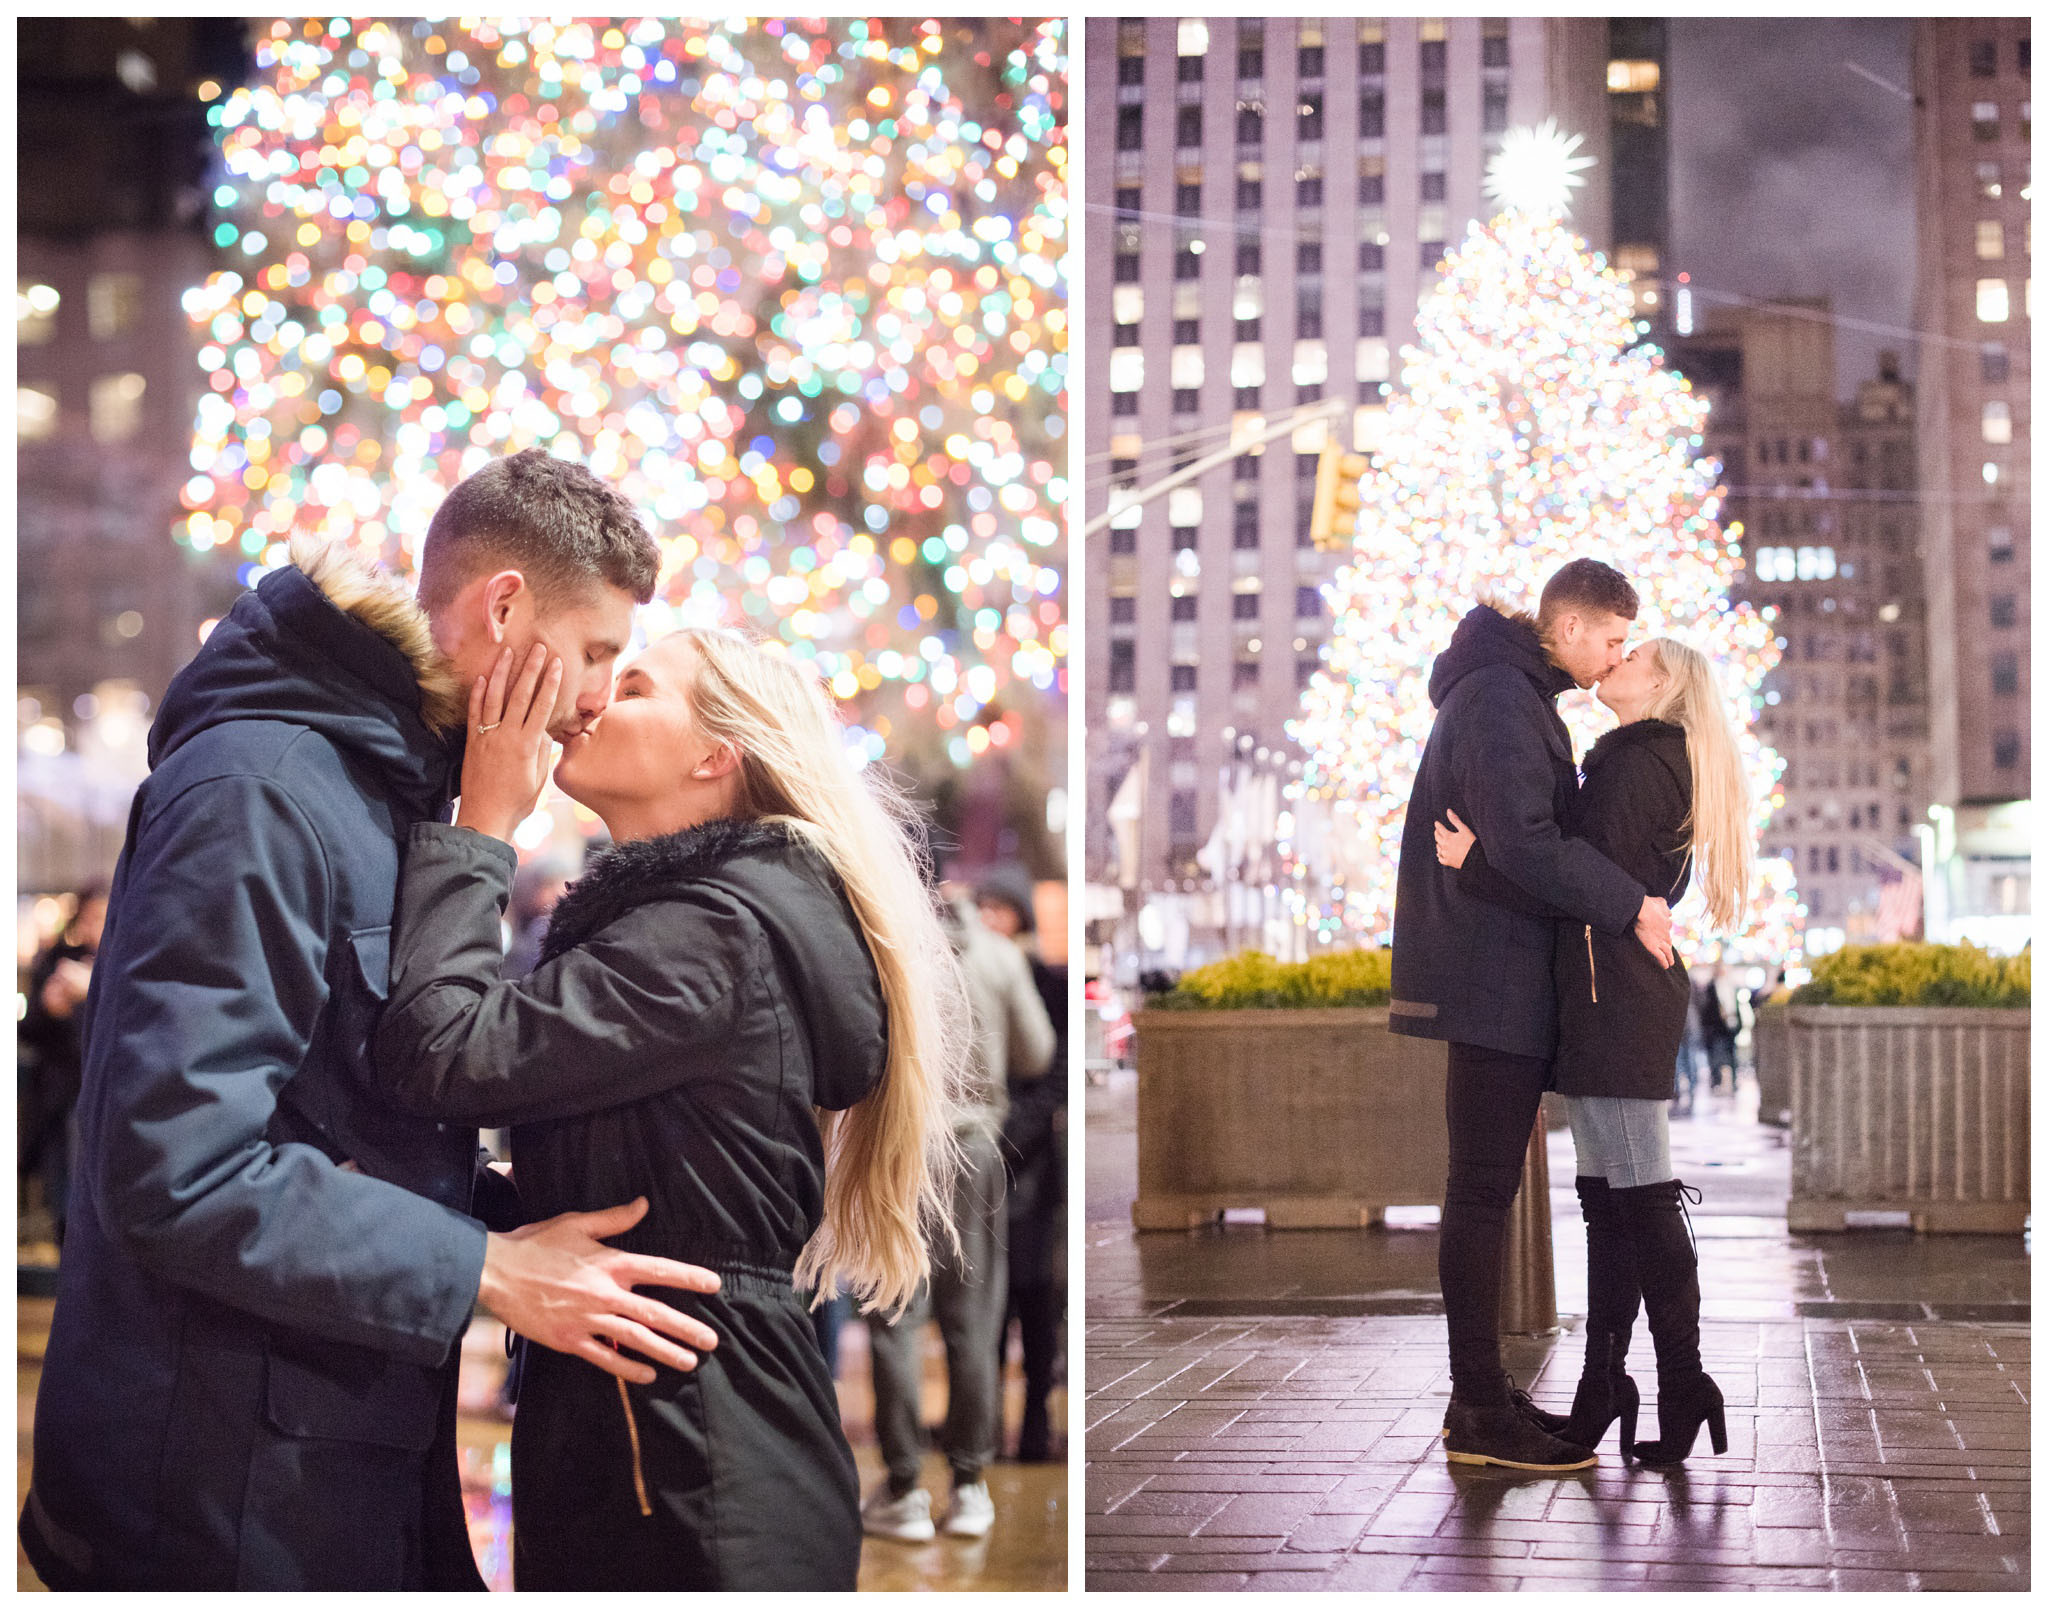 rockefeller center ice rink christmas tree surprise proposal nyc photographer